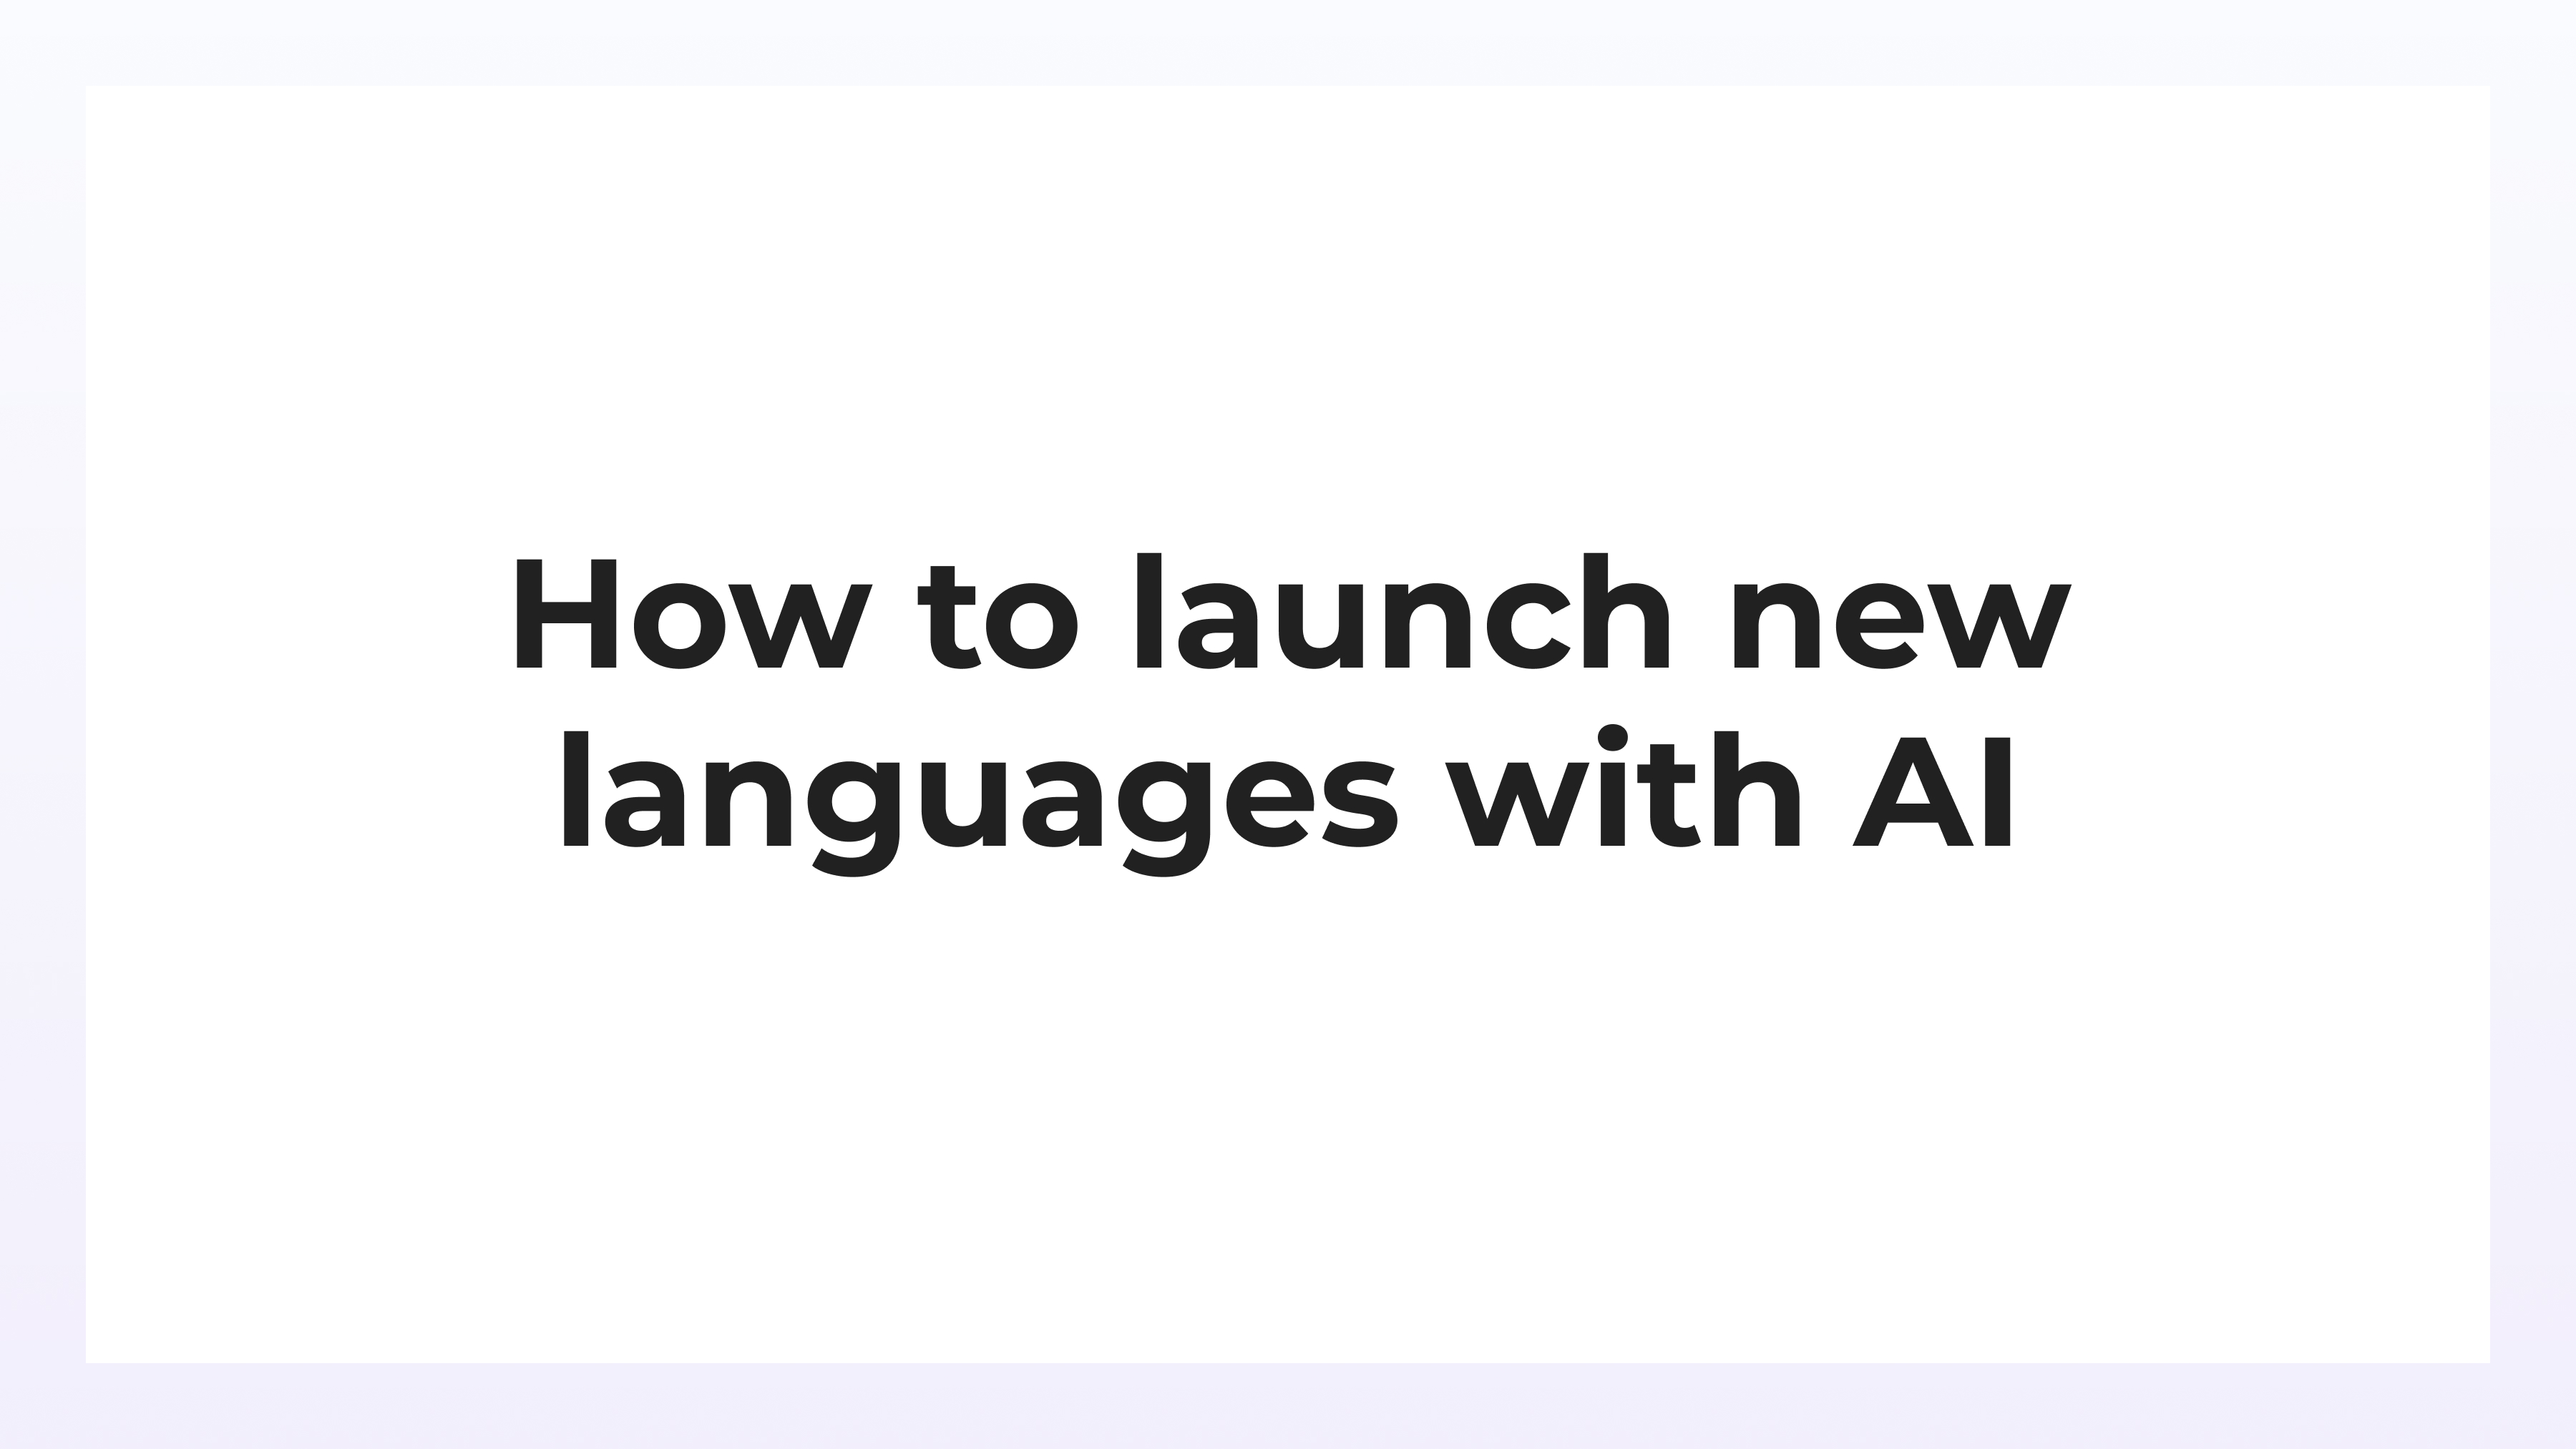 How to launch new languages with AI webinar from Smartling